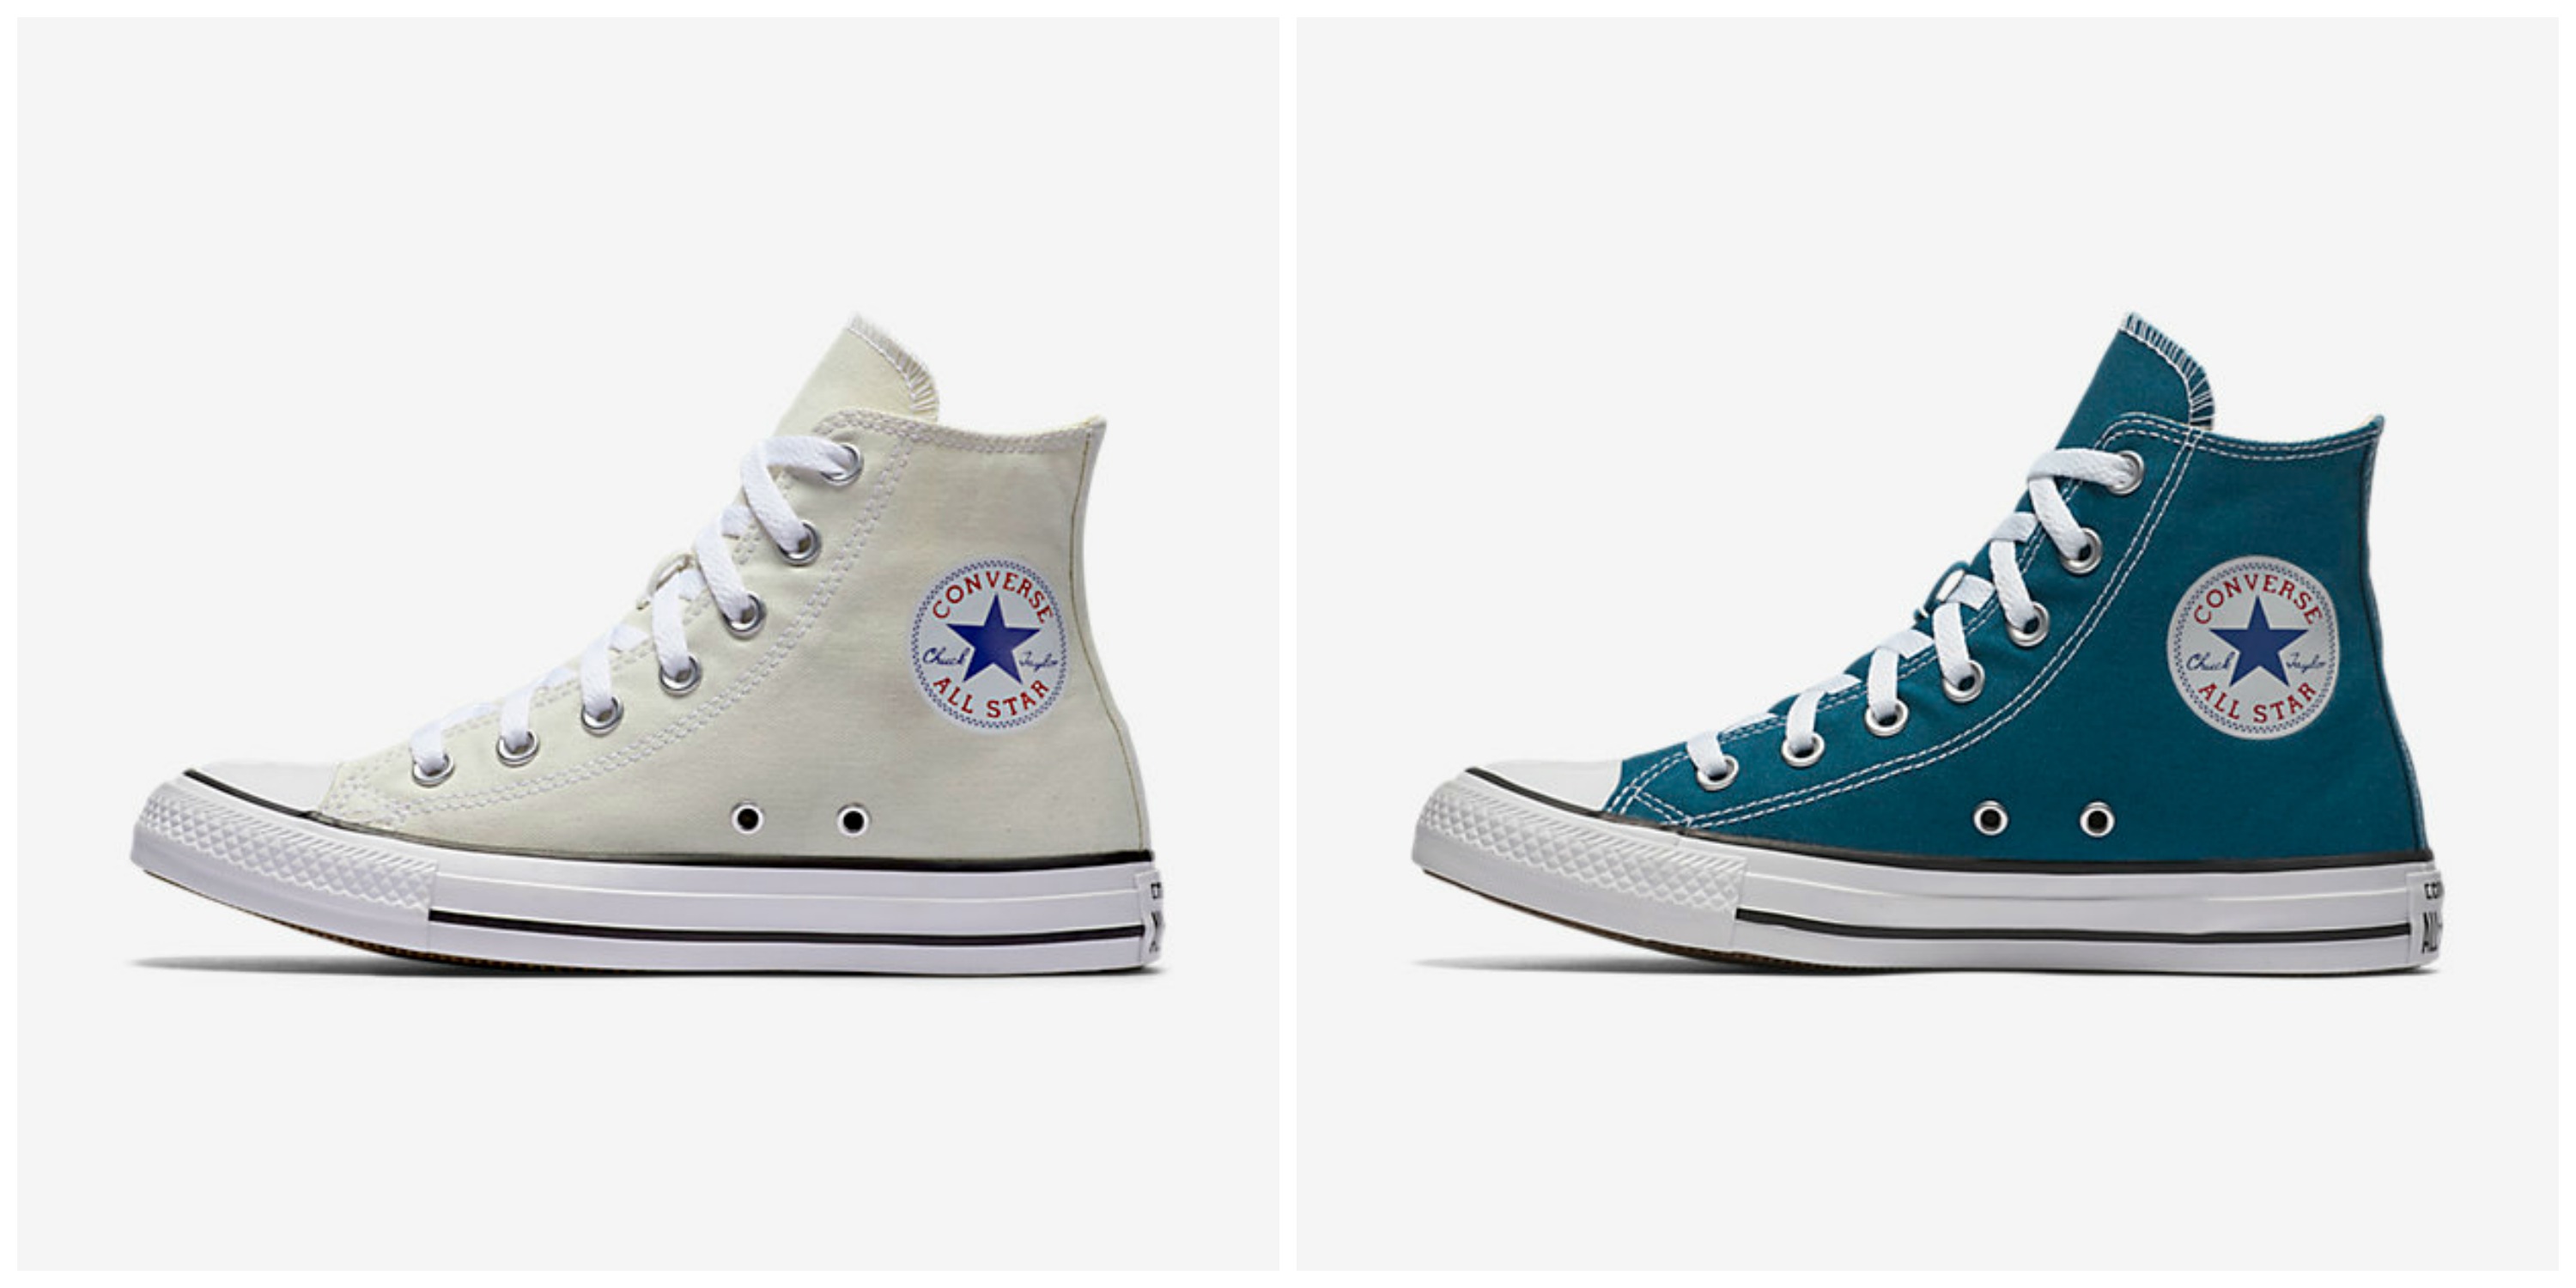 Converse Shoes Are On Sale For As Low As $! - Simplemost